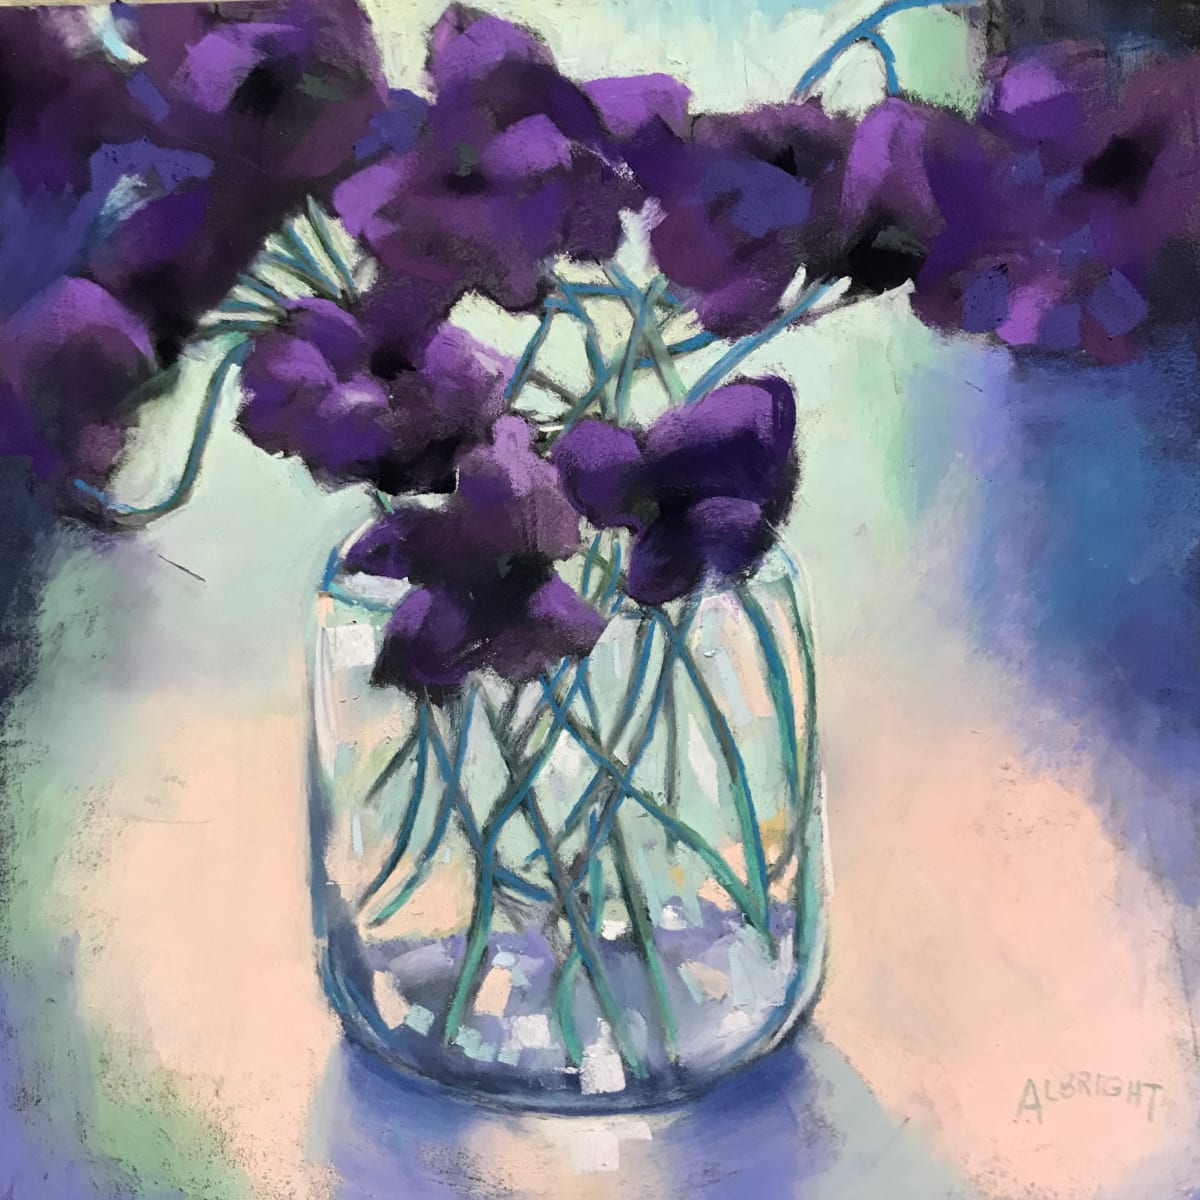 Tender Violets Greet the Day by Judy Albright 